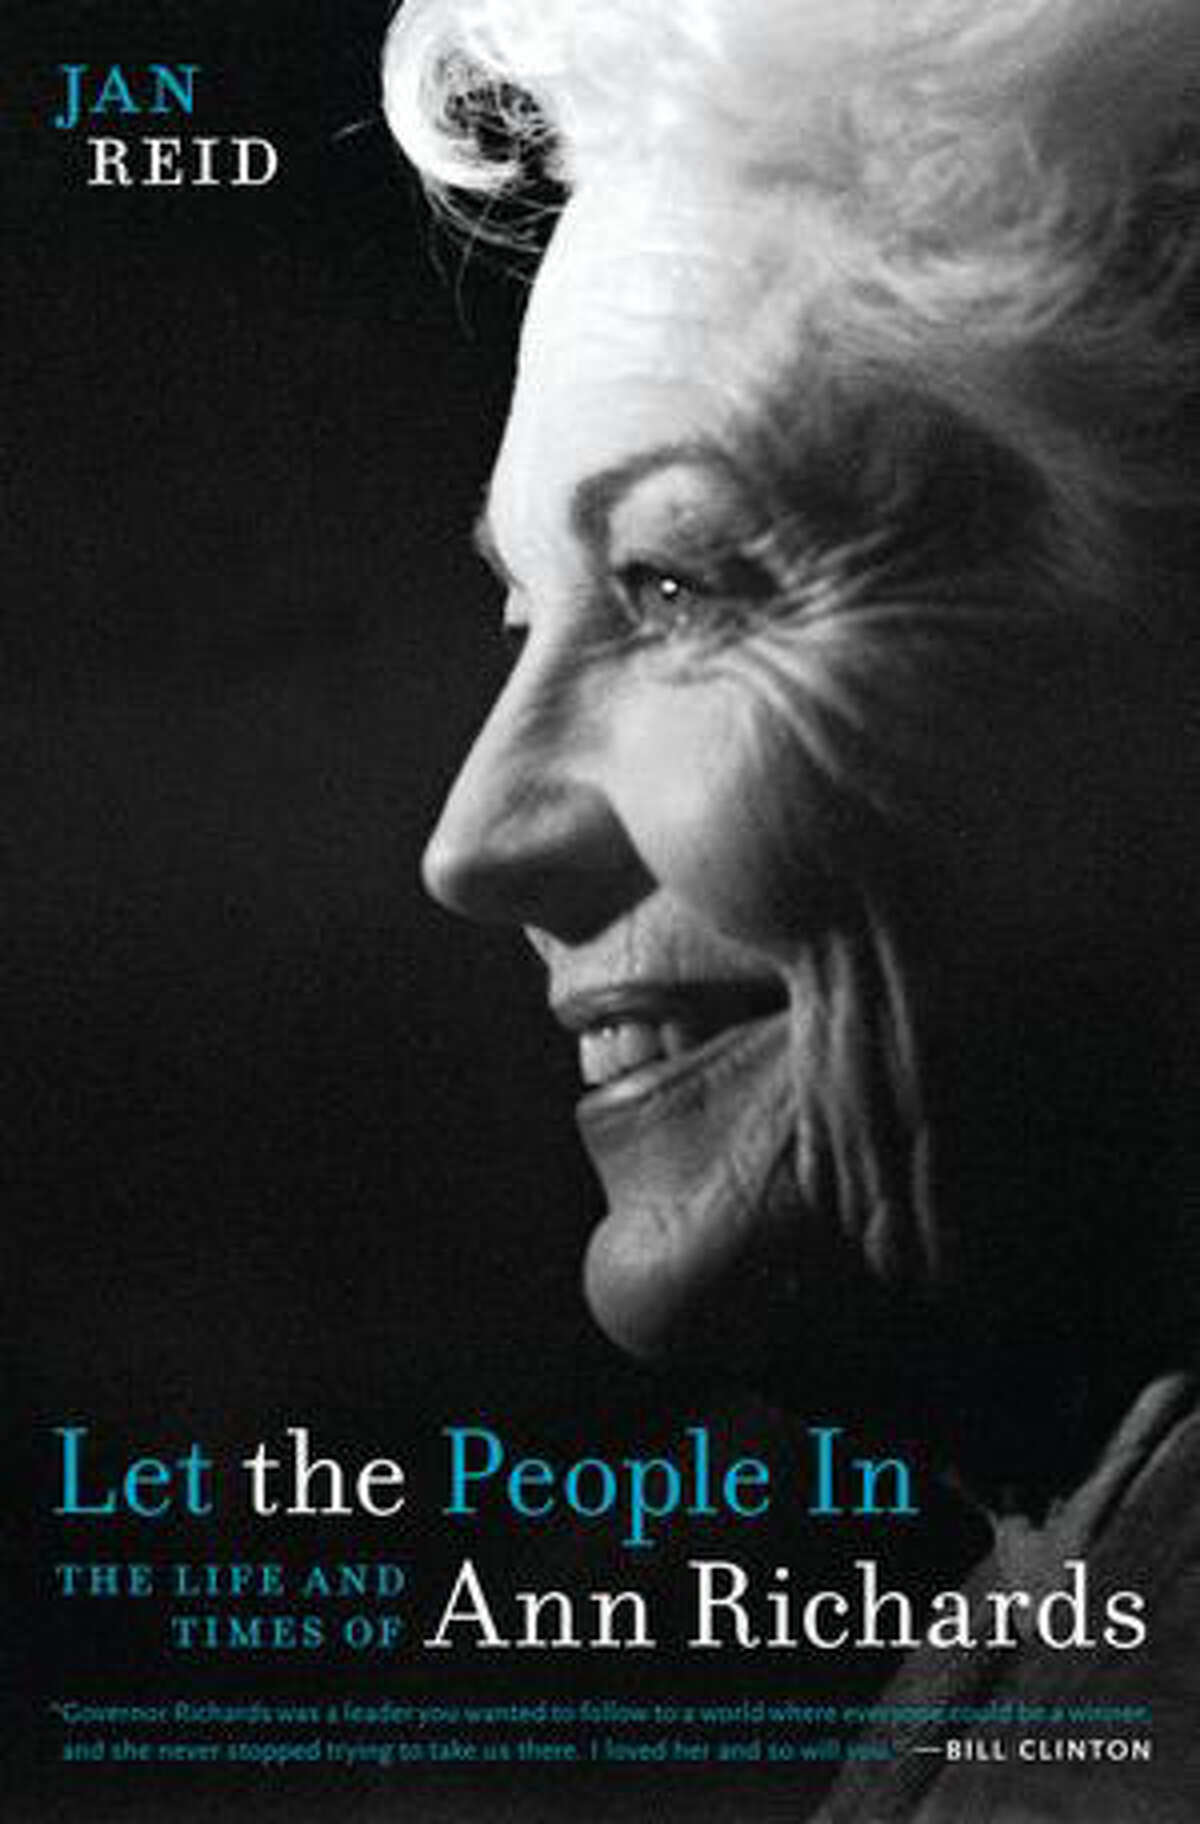 Jan Reid reveals Ann Richards in all her complexity in a new biography from UT Press, “Let the People In.”